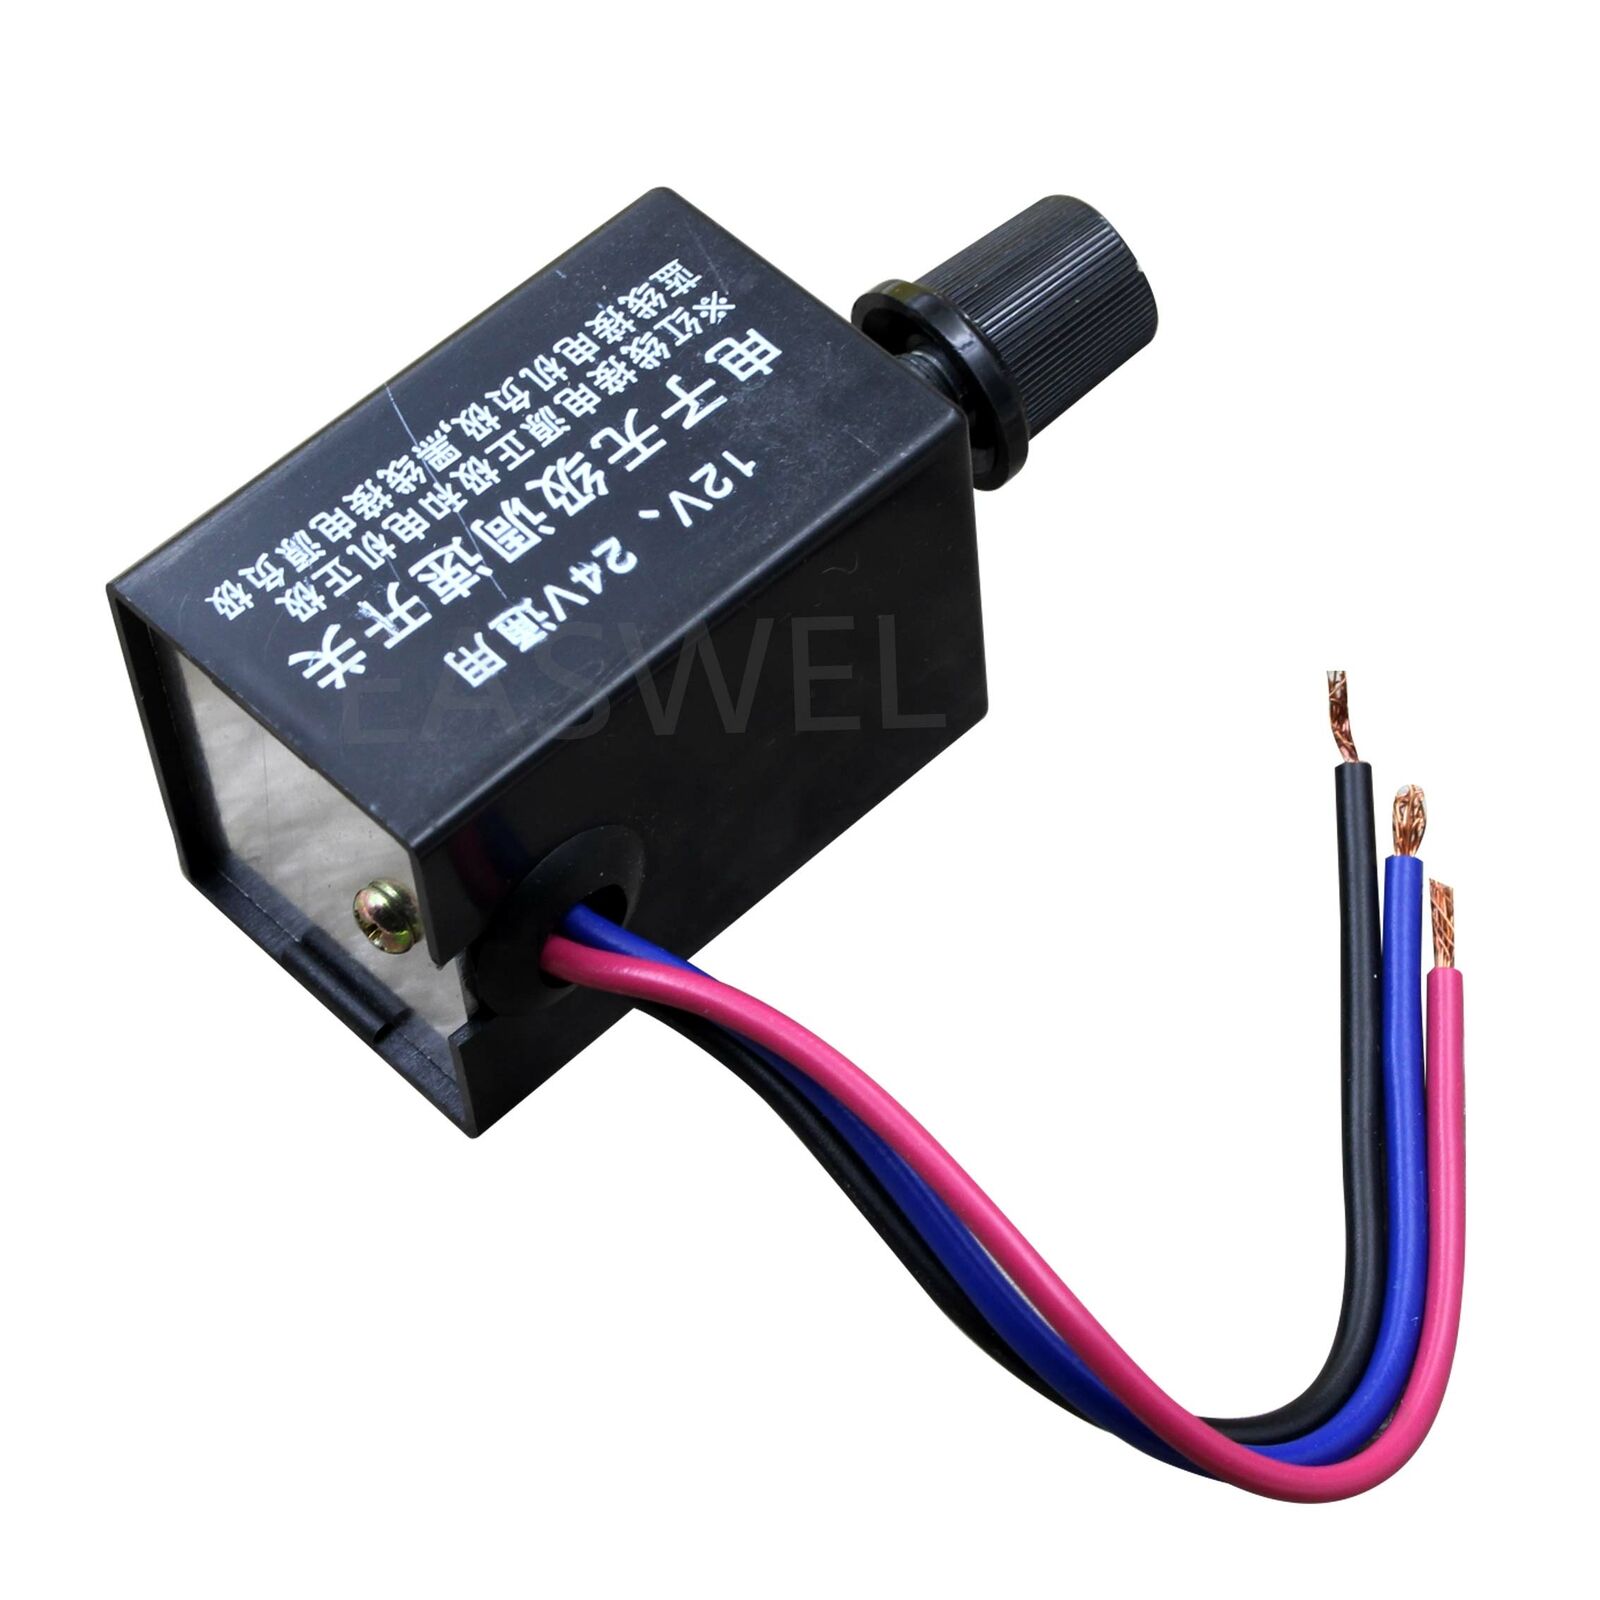 Us Dc 12V 24V 10A Motor For Car Truck Fan Heater Vehicle Speed Controller Switch